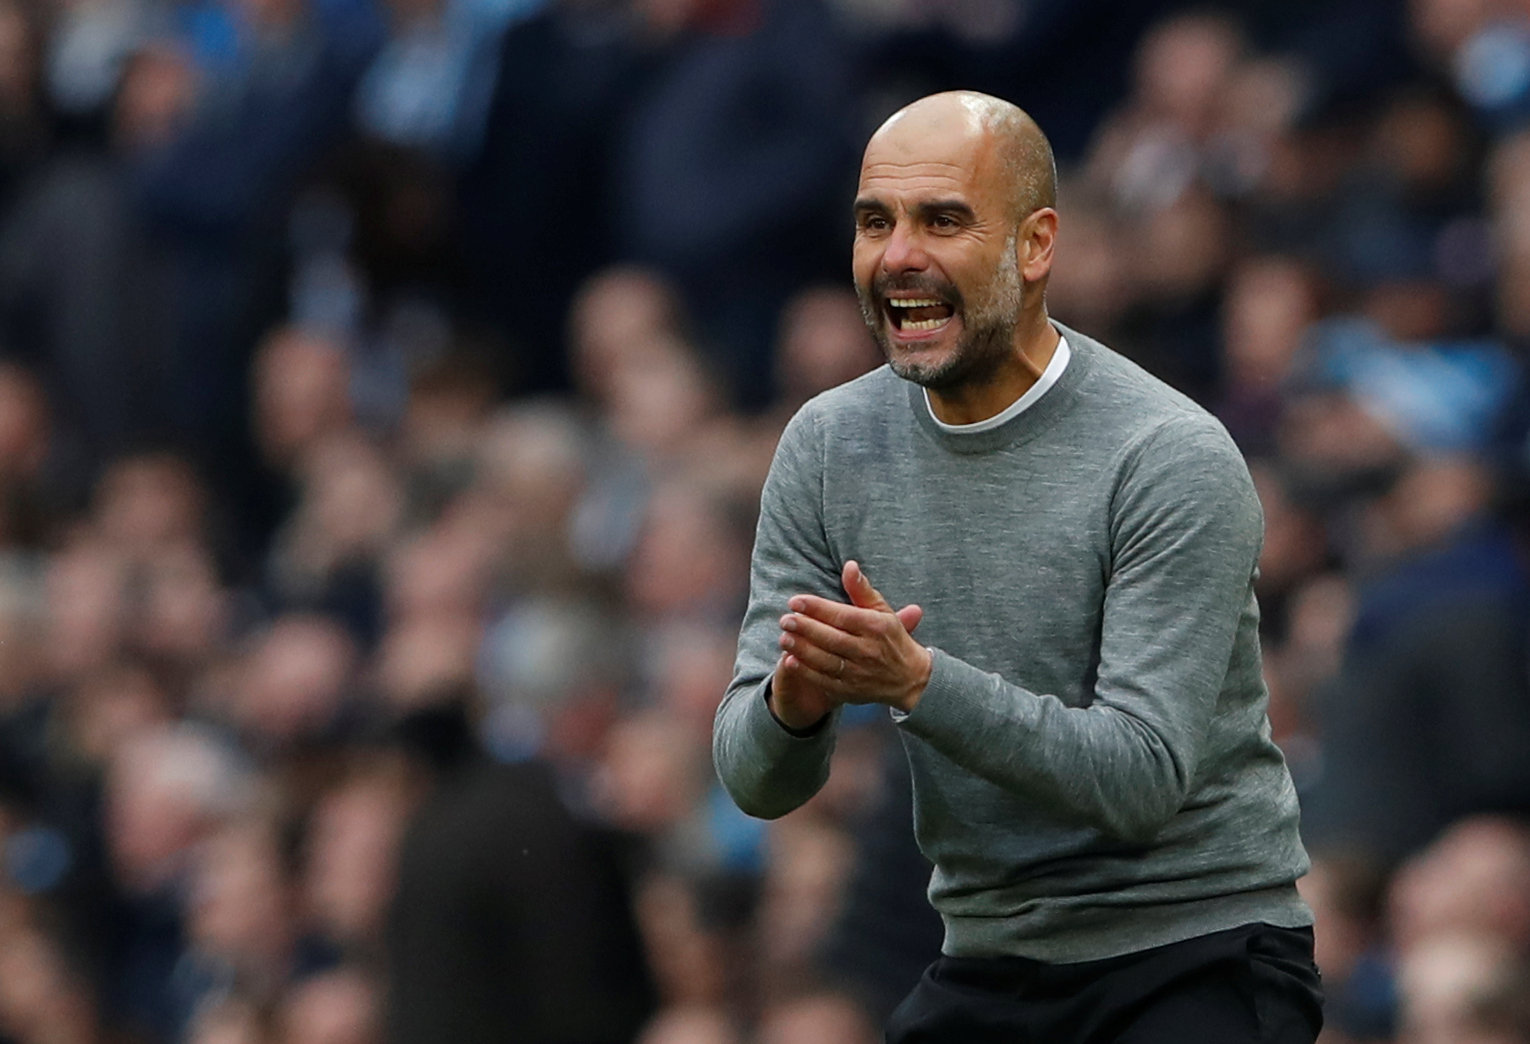 Football: Derby loss shows winning league not easy, says Guardiola